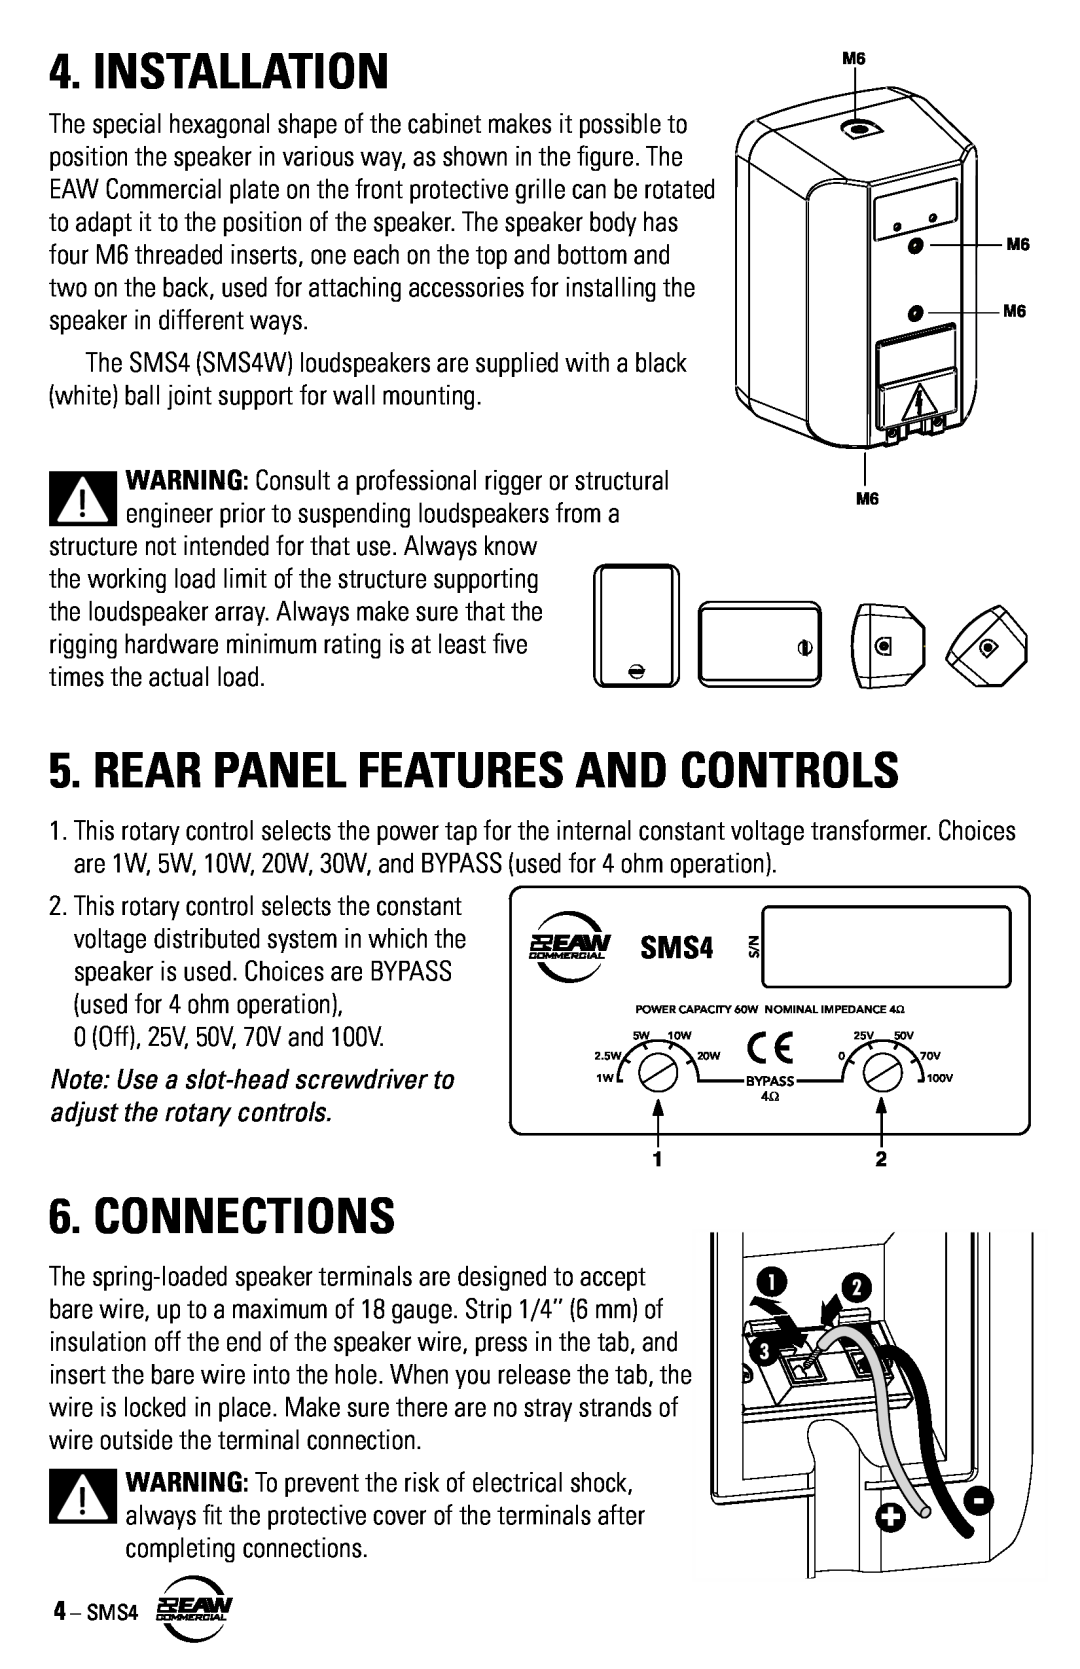 EAW SMS4 instruction manual Installation, Connections, Rear Panel Features And Controls 